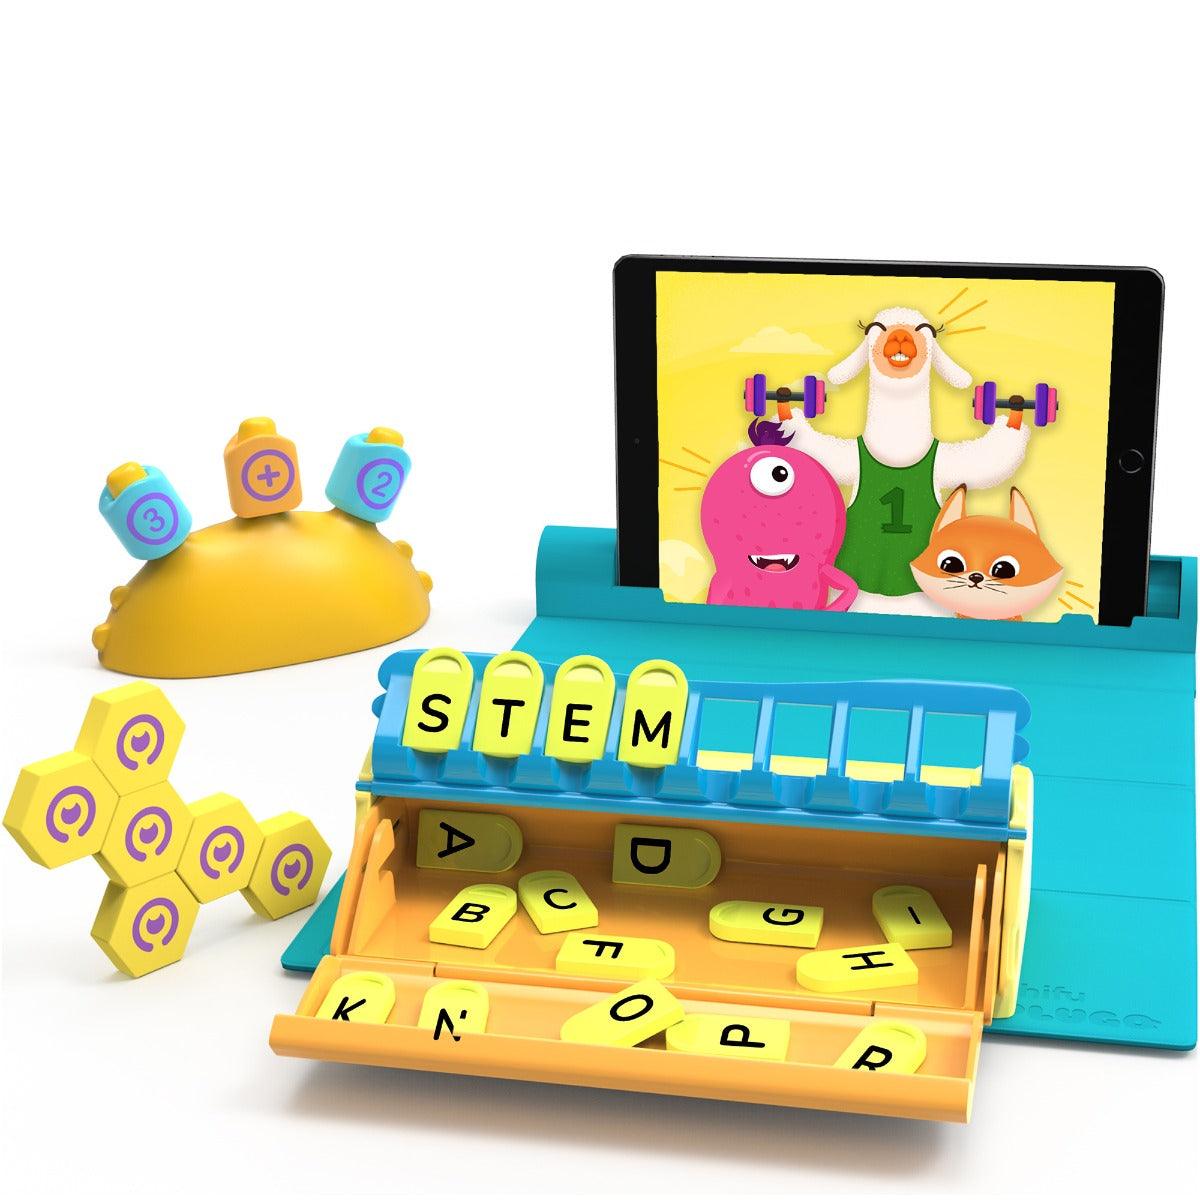 Shifu Plugo STEM Wiz Pack - Count, Letters & Link Kits for Kids Ages 4-10 Years (App Based, Device Not Included)